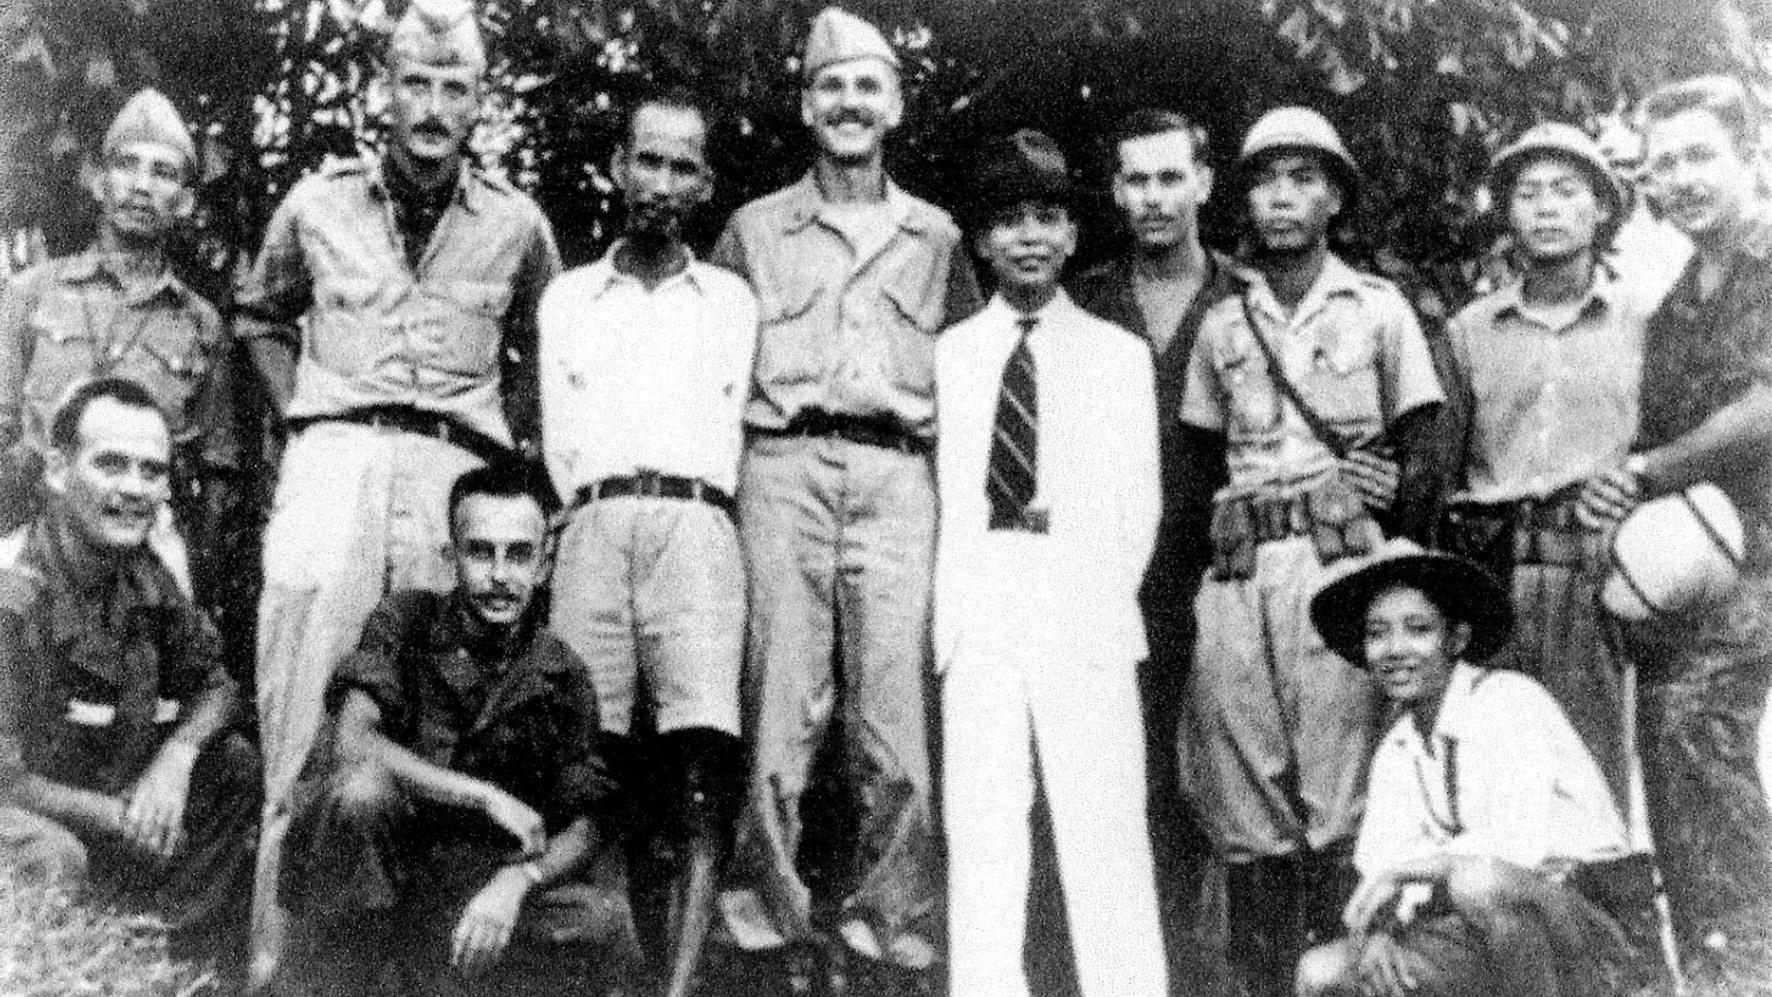 Ho Chi Minh (standing, third from left), and Vo Nguyen Giap (in white suit), with an OSS team in 1945